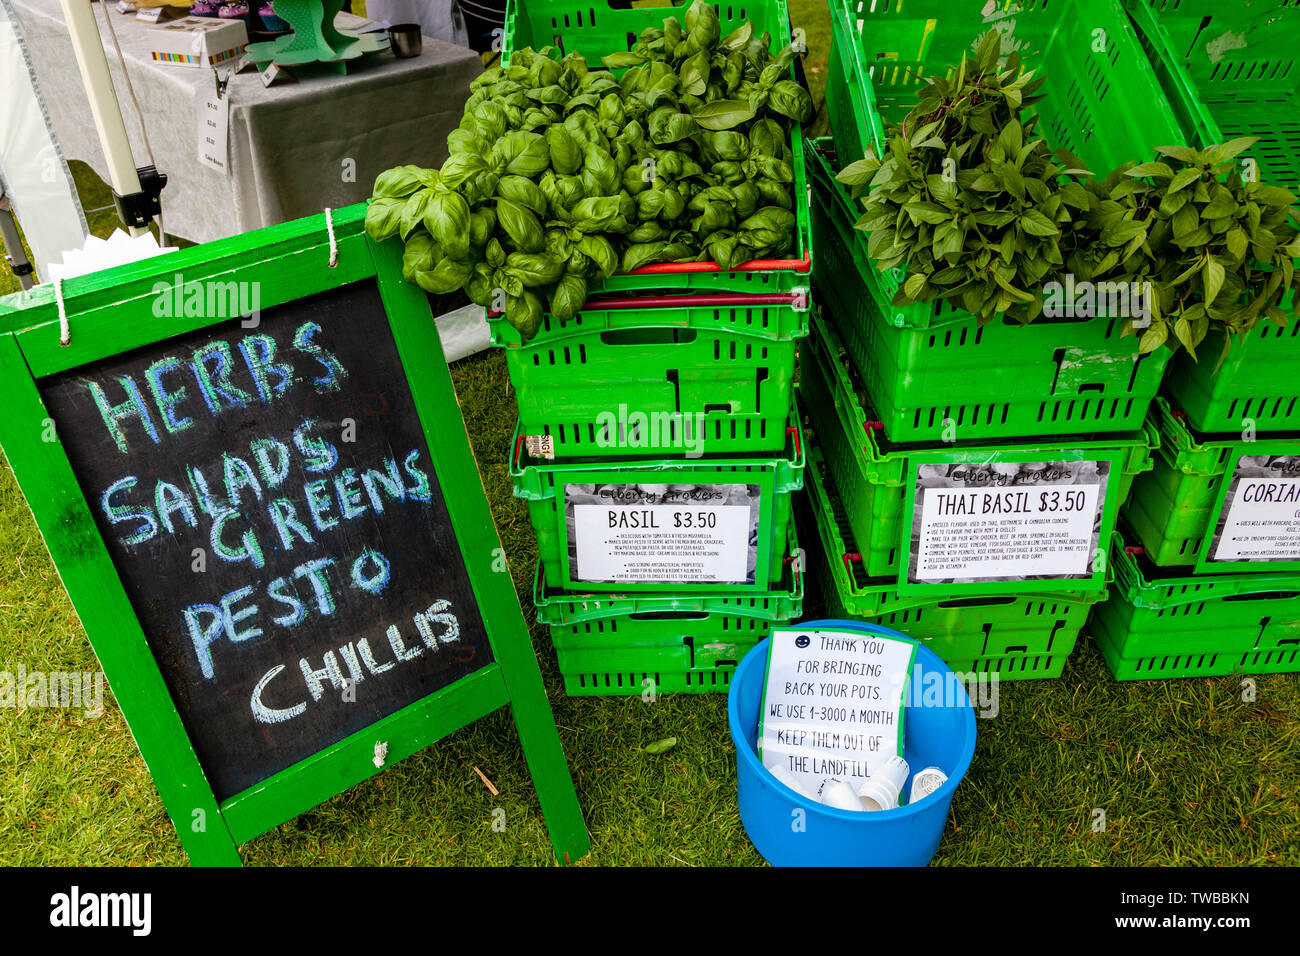 Fresh Herbs For Sale At The Mount Maunganui Farmers Market, North Island, New Zealand Stock Photo